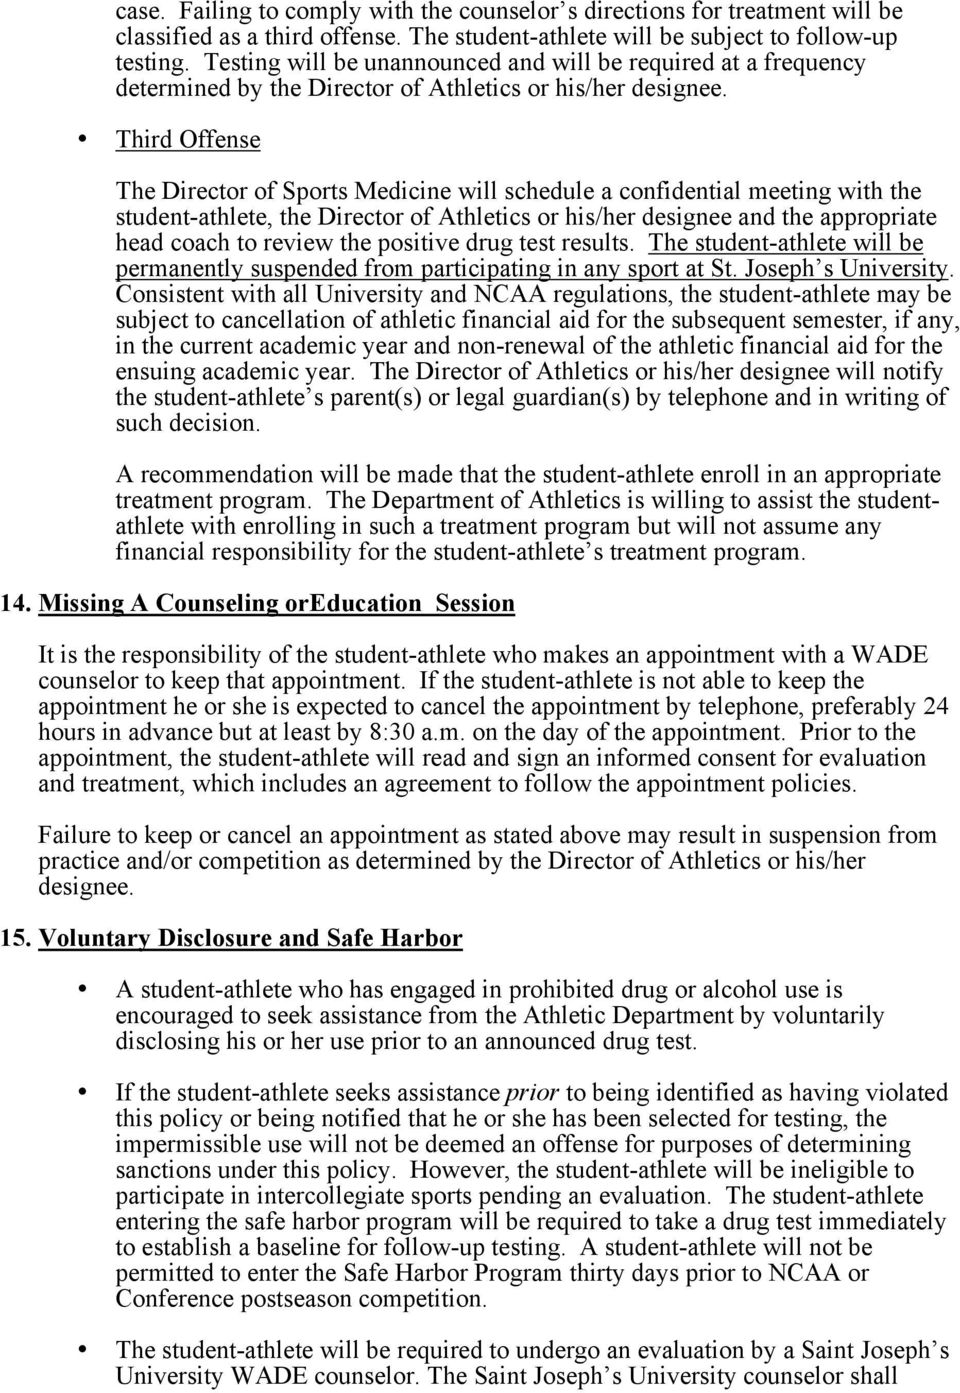 Third Offense The Director of Sports Medicine will schedule a confidential meeting with the student-athlete, the Director of Athletics or his/her designee and the appropriate head coach to review the